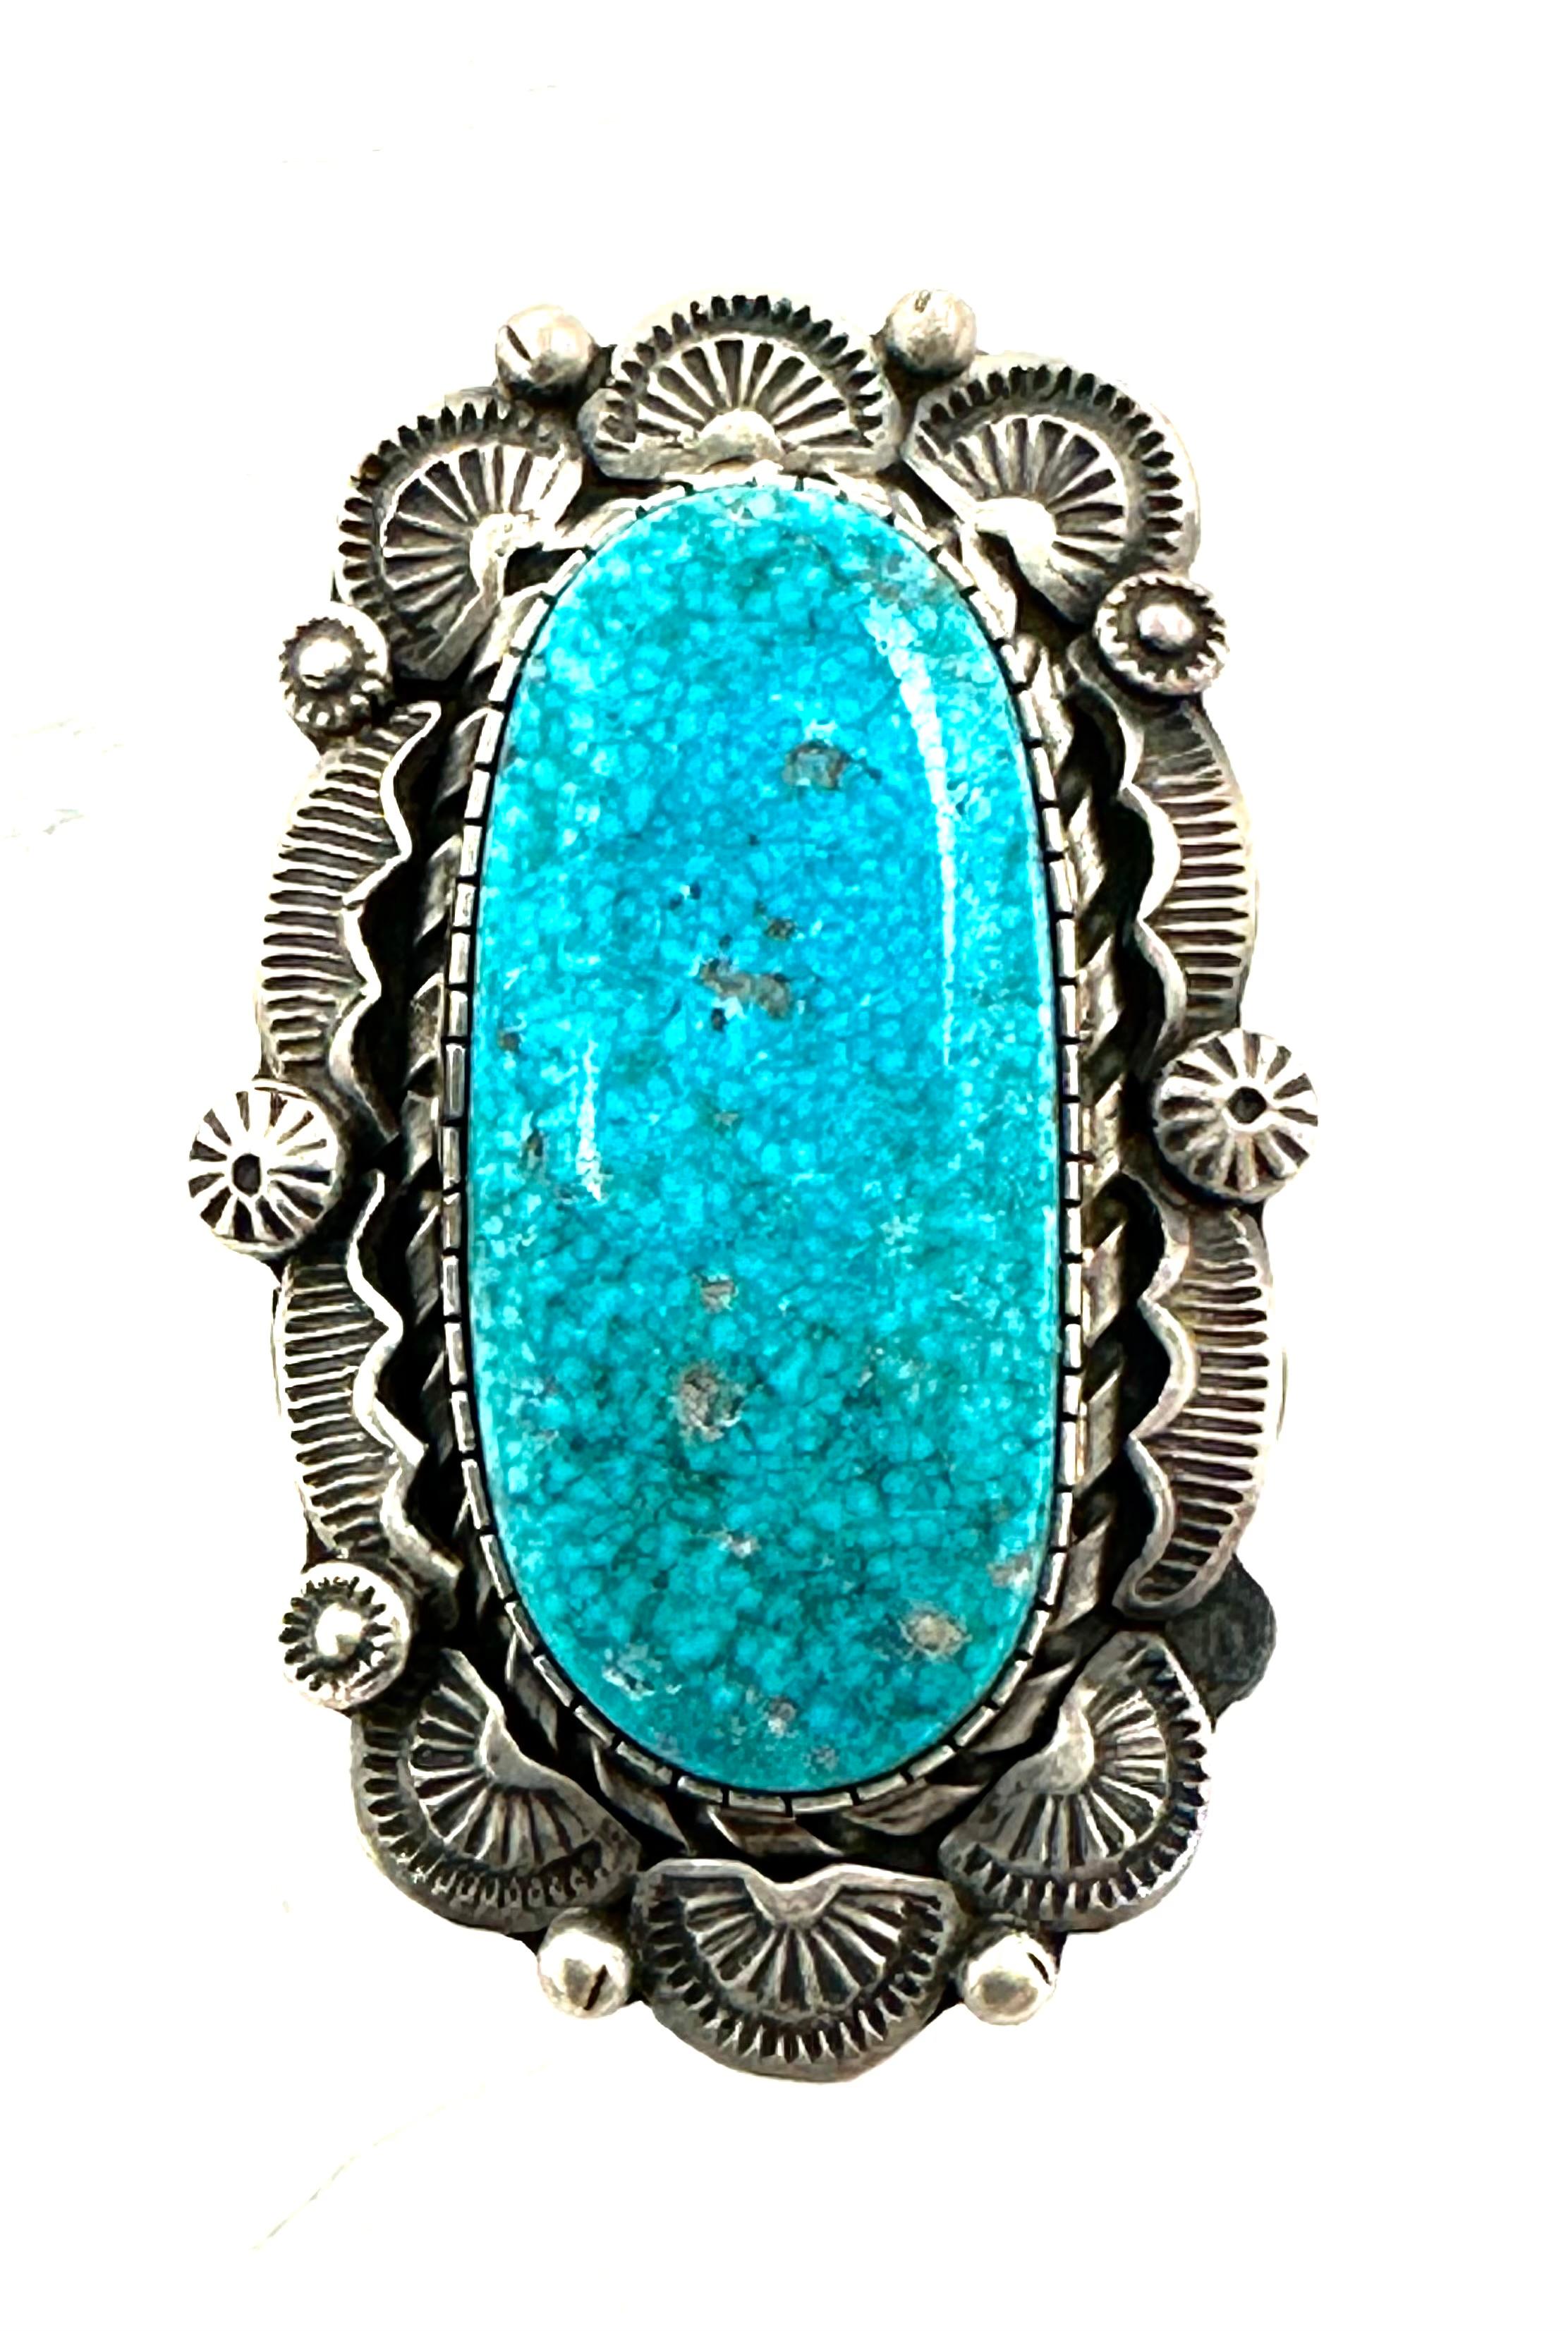 Sterling Silver .925 Kingman Turquoise Navajo Made Ring By Betta Lee .
Measures approximately 2